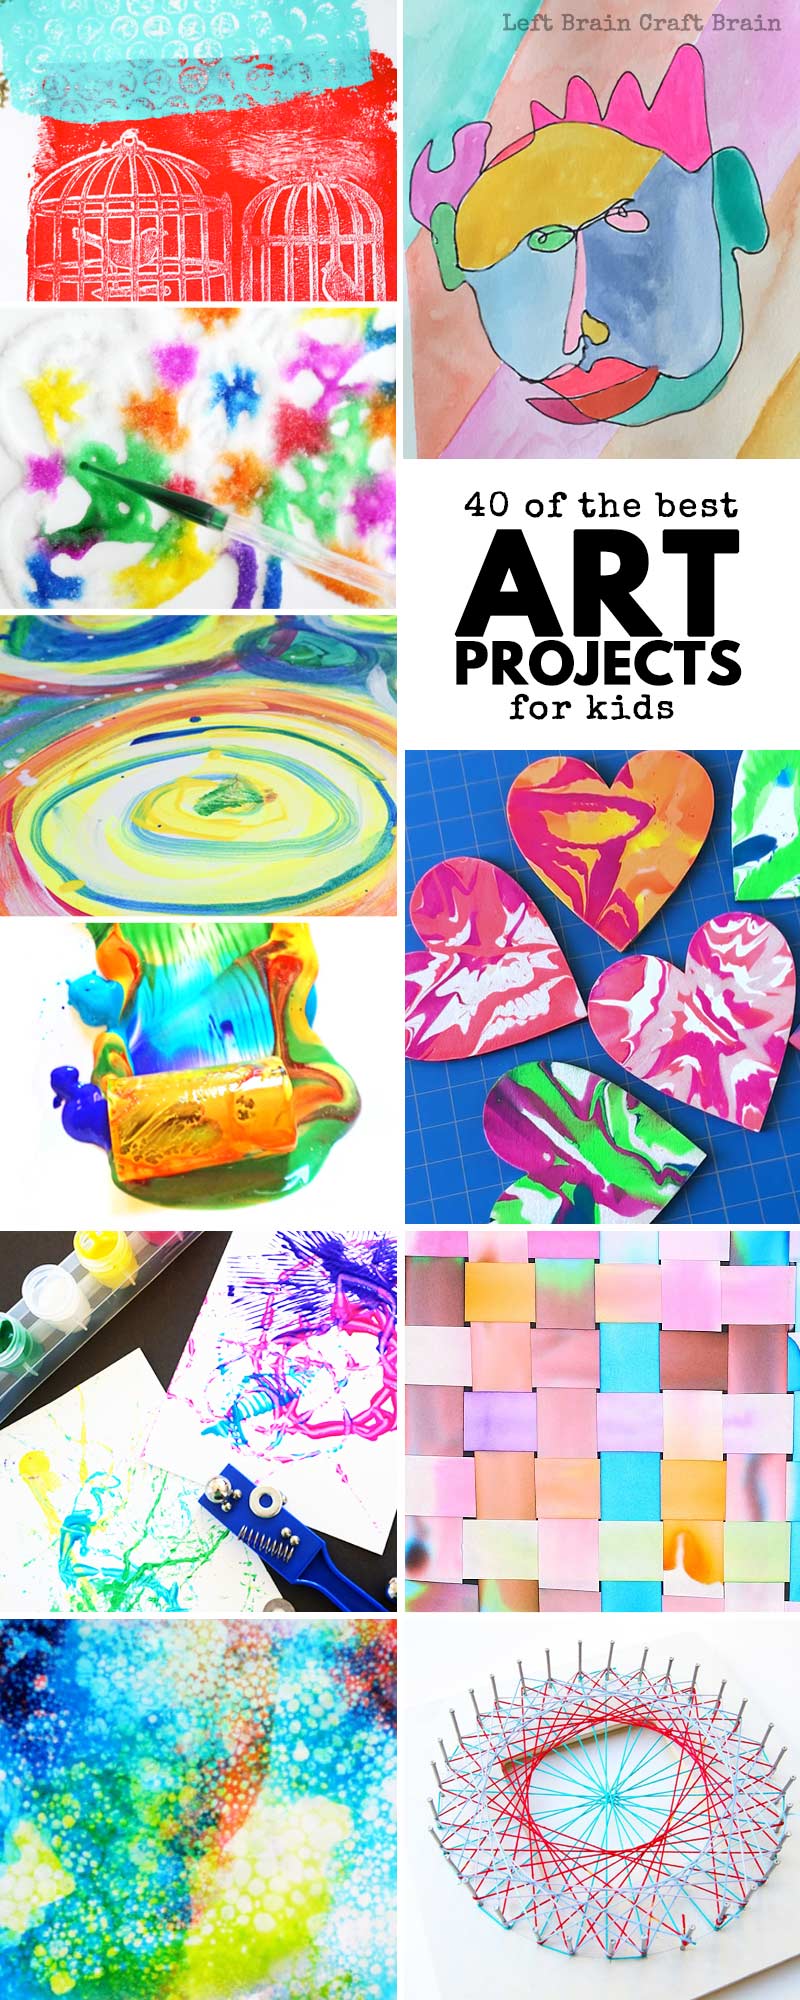 Your kids will love this collection of art projects for kids! You'll find everything you need for cool art projects and simple art lessons for kids. Process art, arts integration projects, recycled art, and more. Many using arts and crafts materials you already have at home.